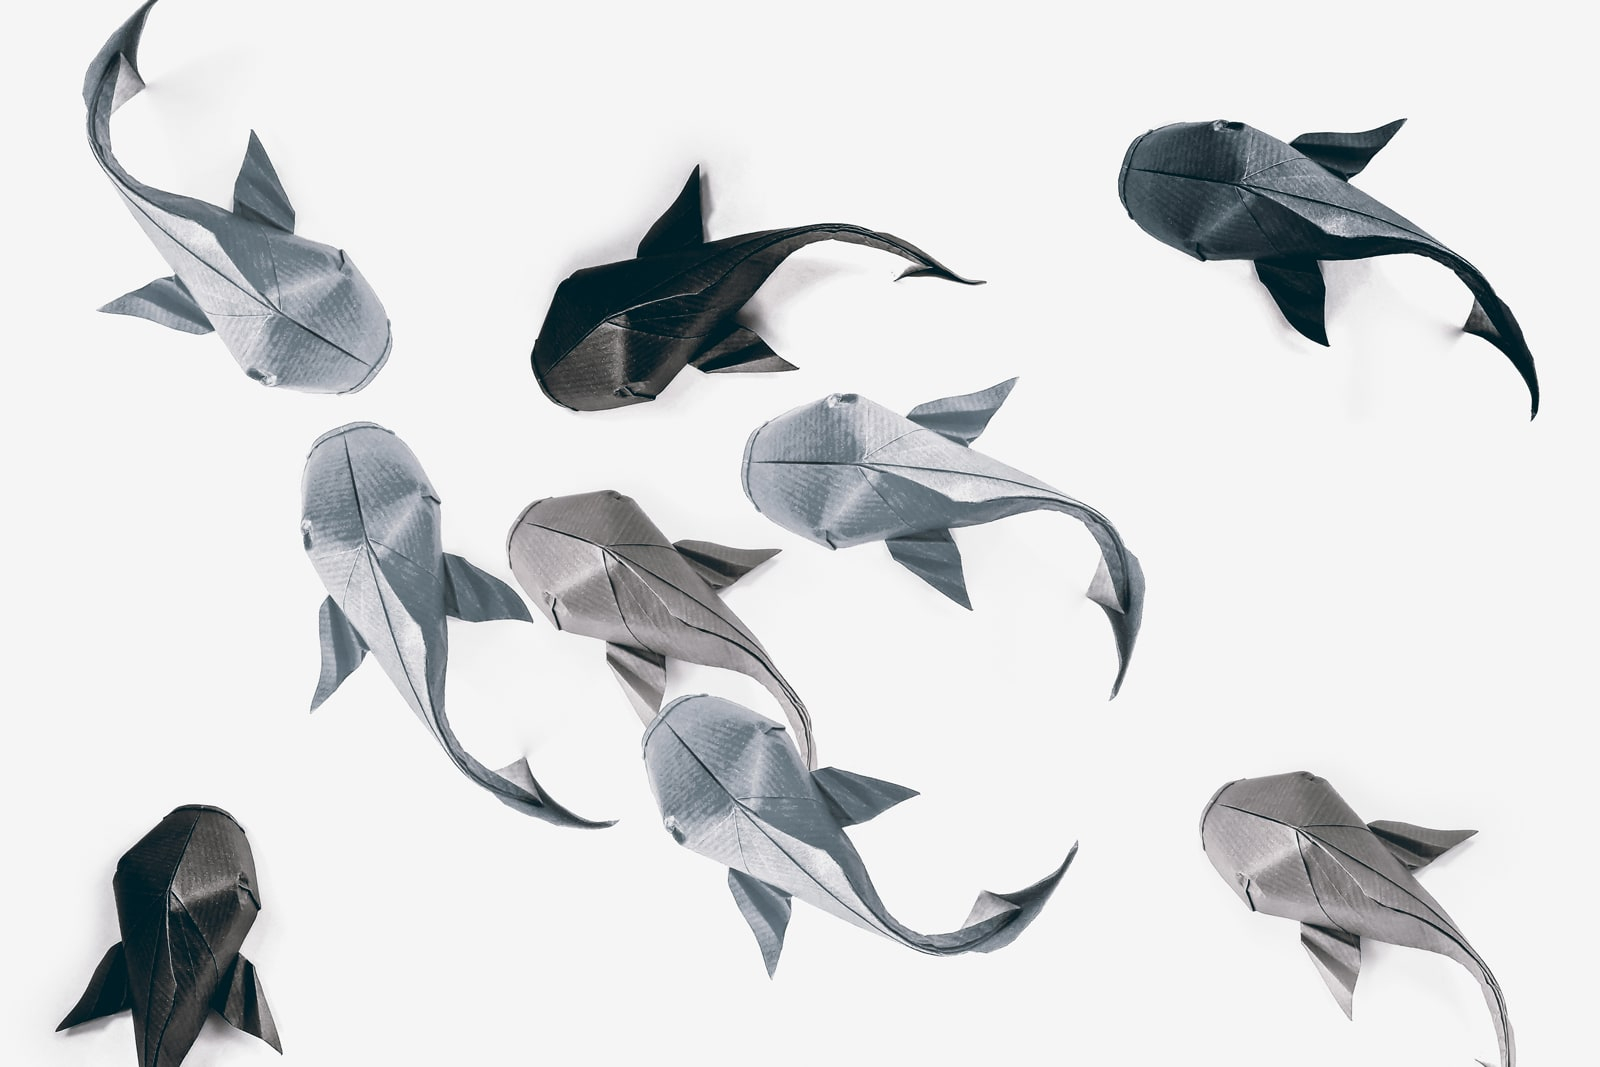 Fish Money Origami You Should Definitely Give A Carp About These Beautiful Origami Koi